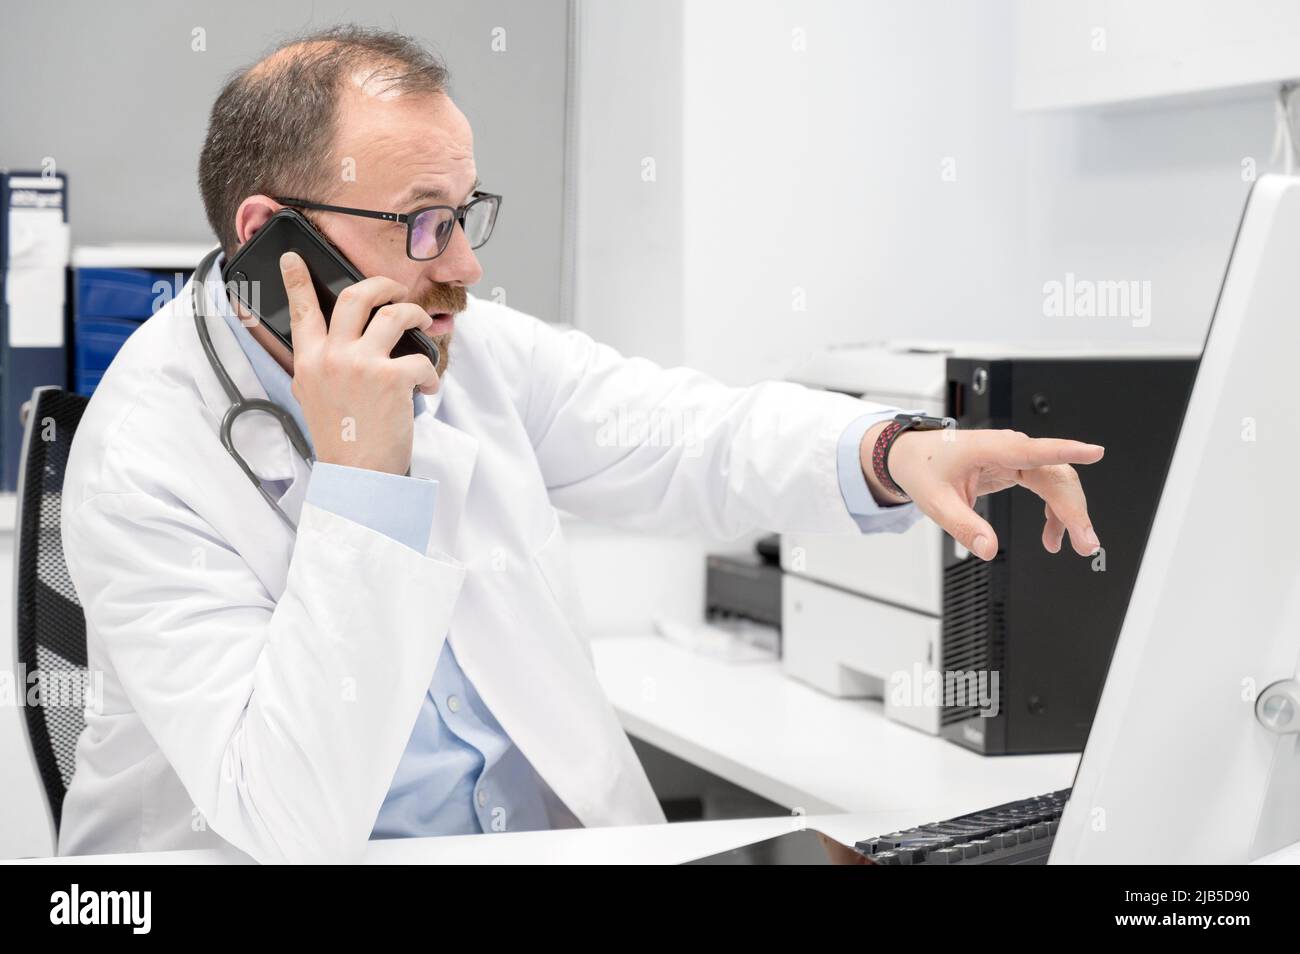 Male doctor pointing with finger on desktop computer while talking on the phone, discussing treatment with colleague. High quality photo. Stock Photo